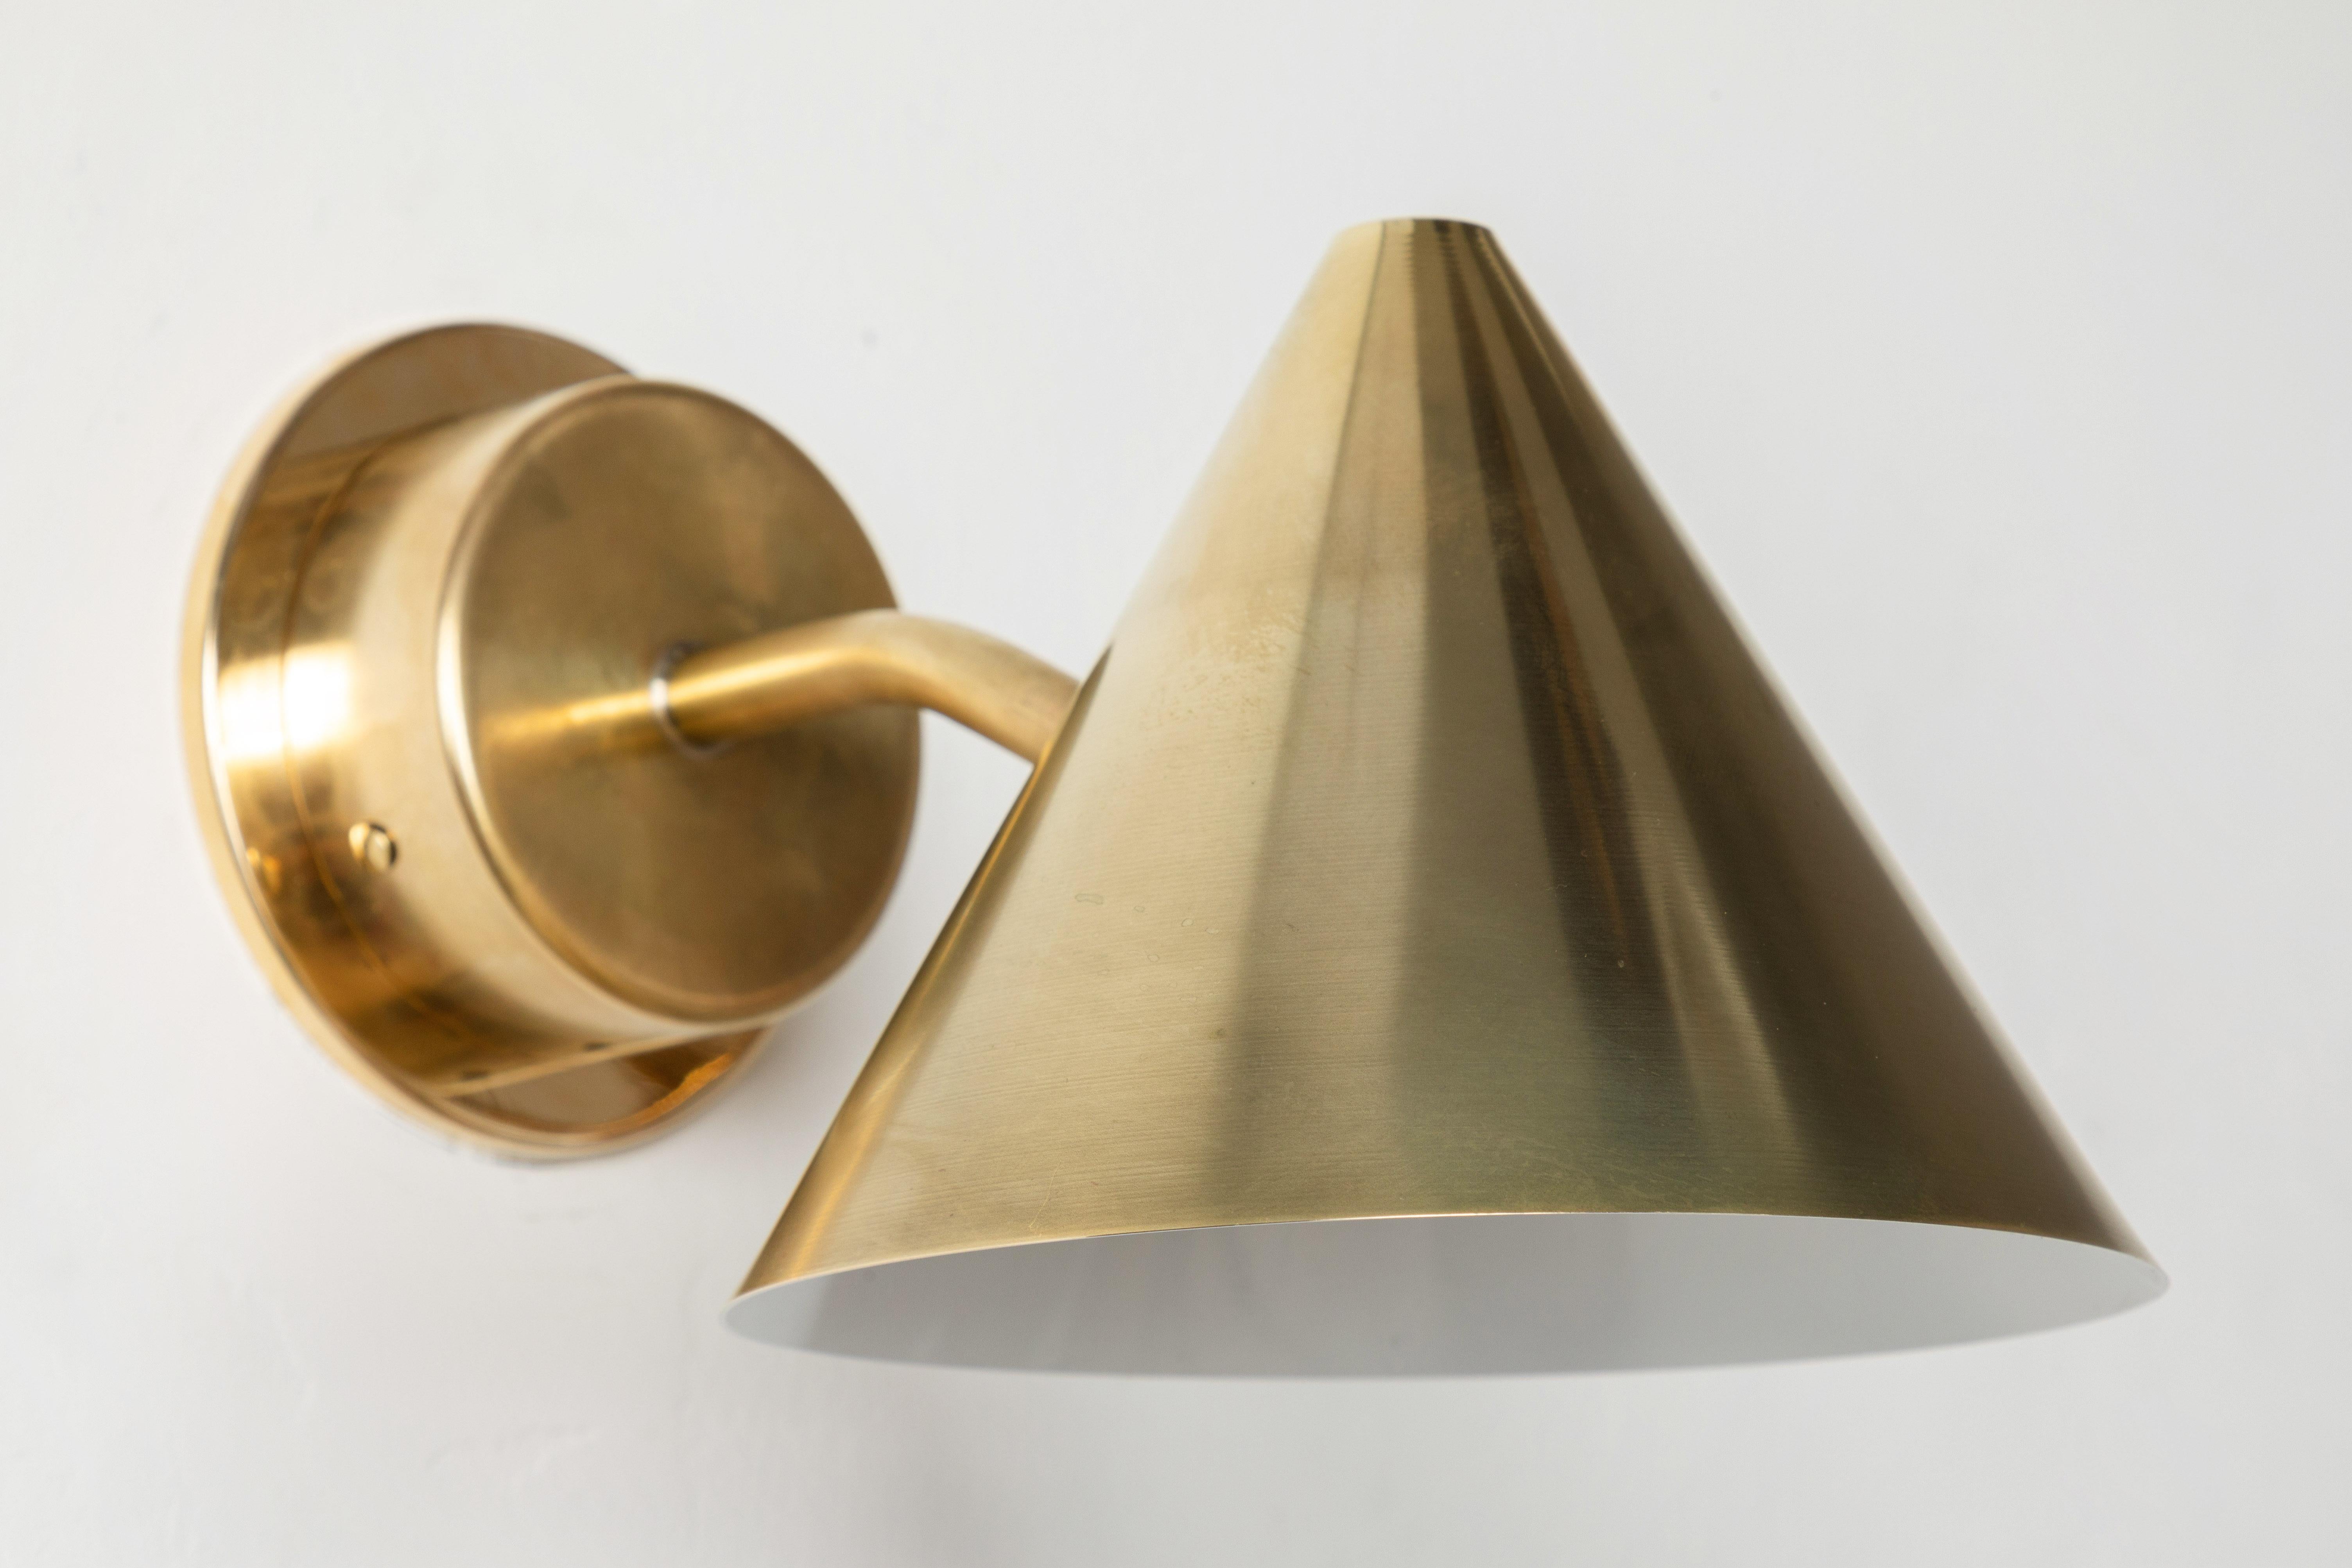 Pair of Hans-Agne Jakobsson 'Mini-Tratten' Raw Brass Outdoor Sconces For Sale 2